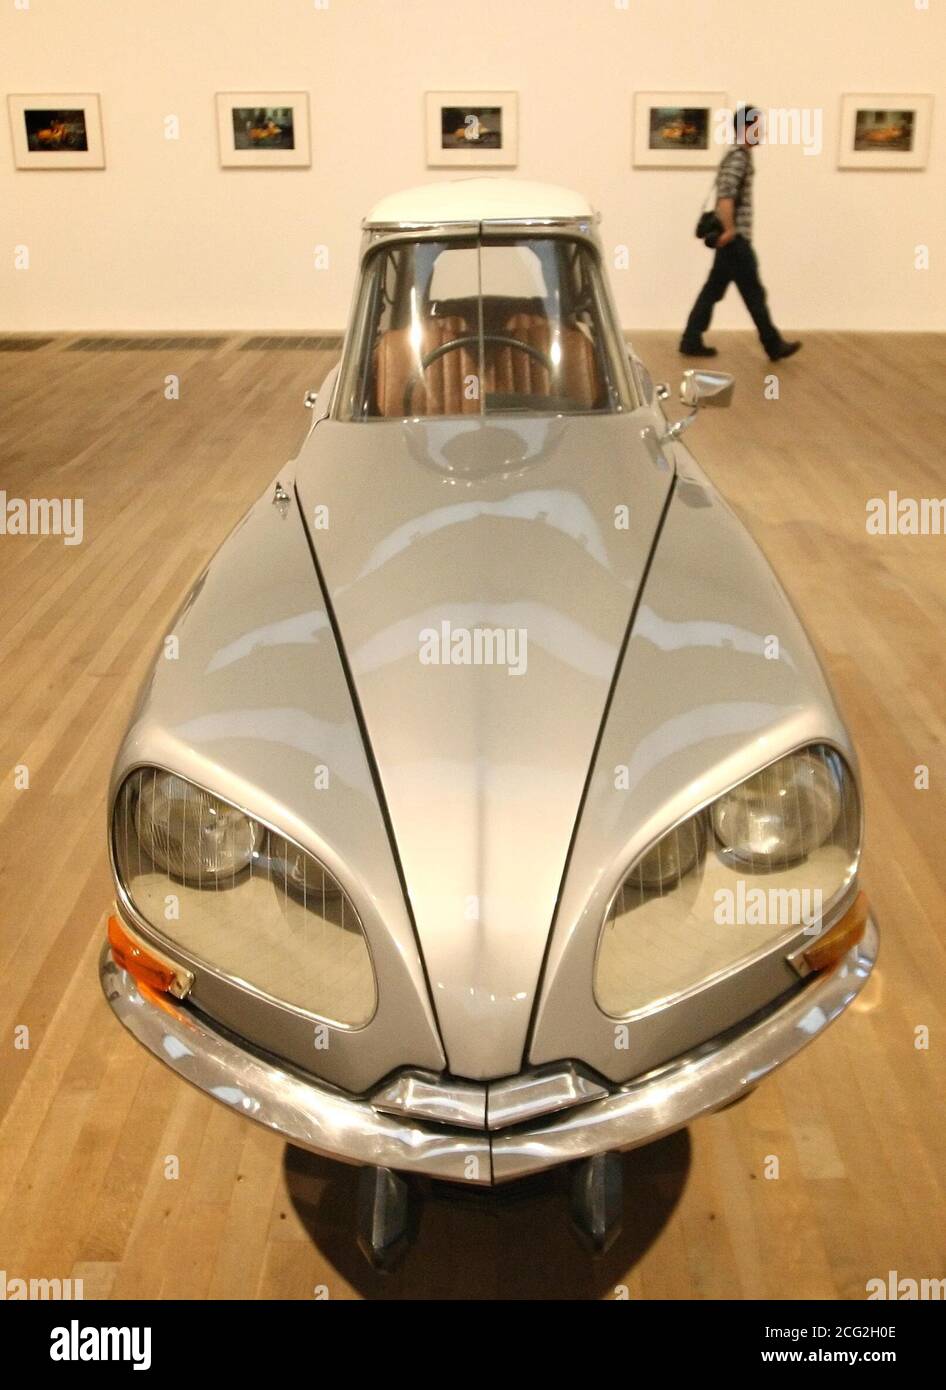 A visitor views 'La D.S.' a modified Cirtroen DS car, by artist Gabriel Orozco, part of a new exhibition of the artist's work, at Tate Modern, in Southwark, central London, which runs from January 19th to April 25 2011. Stock Photo